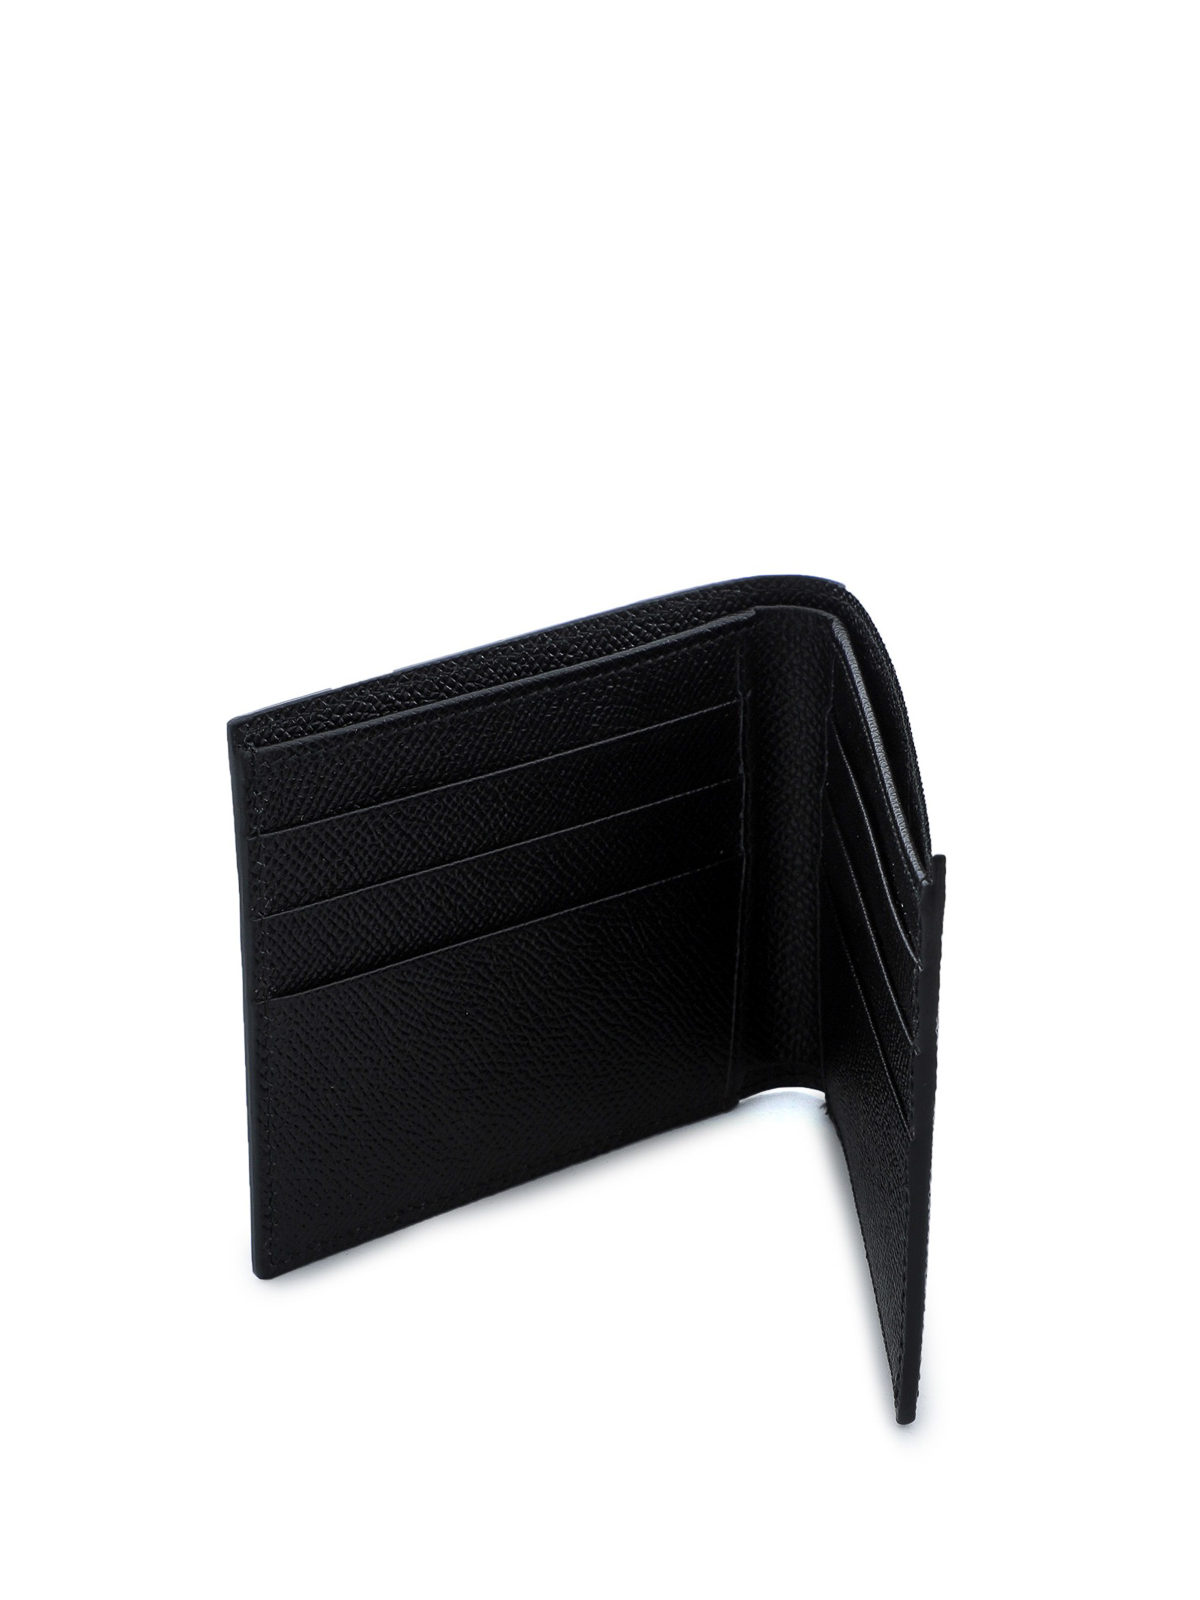 Dauphine Grained Leather Wallet in Black - Dolce Gabbana